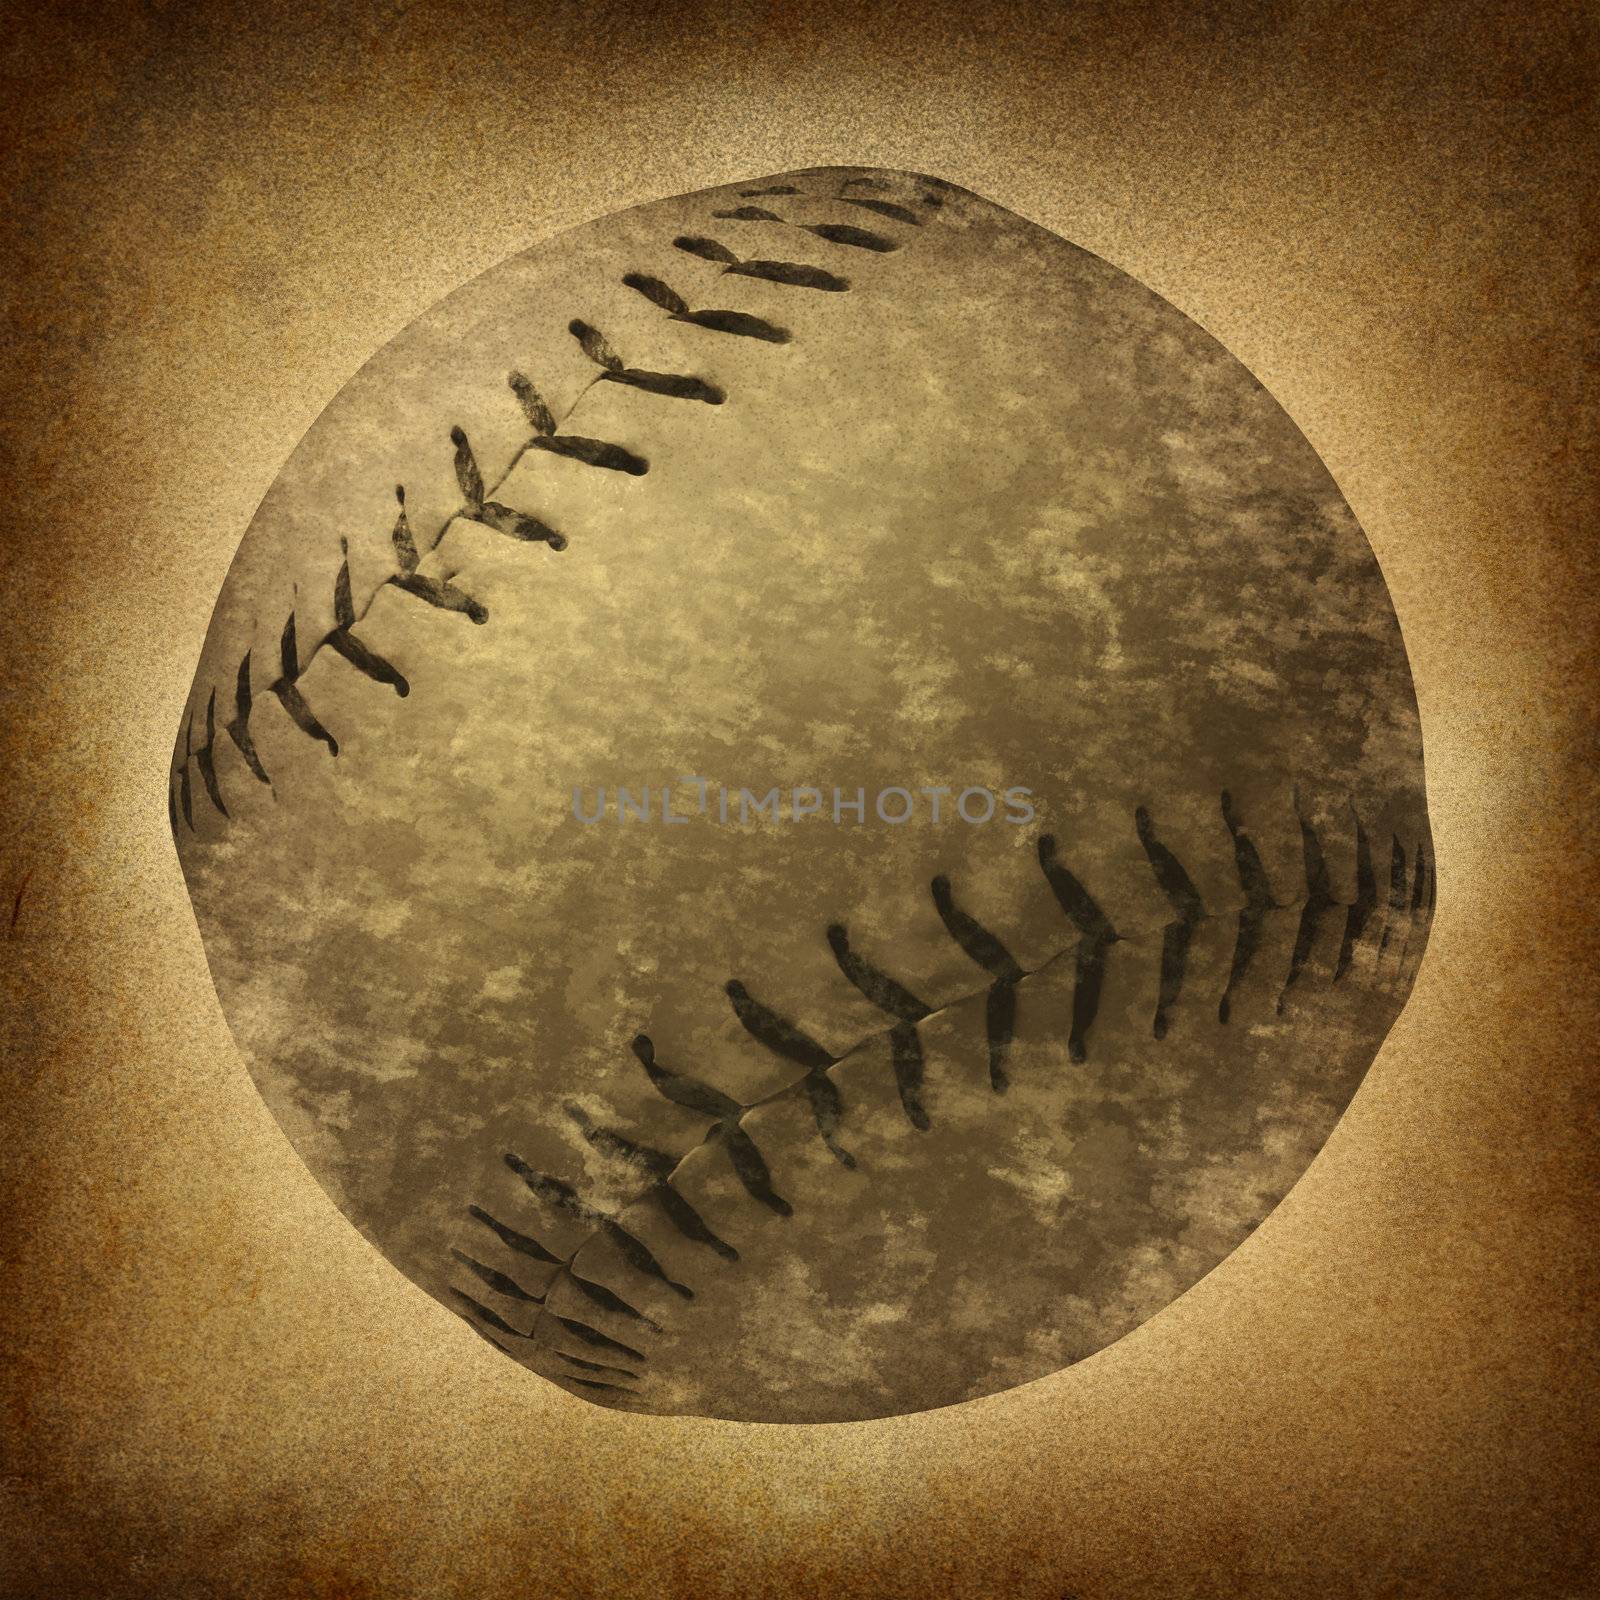 Old grunge baseball or softball as a vintage sports symbol on a dirty parchment background as an American cultural and traditional national pastime sport with a sphere made of leather and stitching.